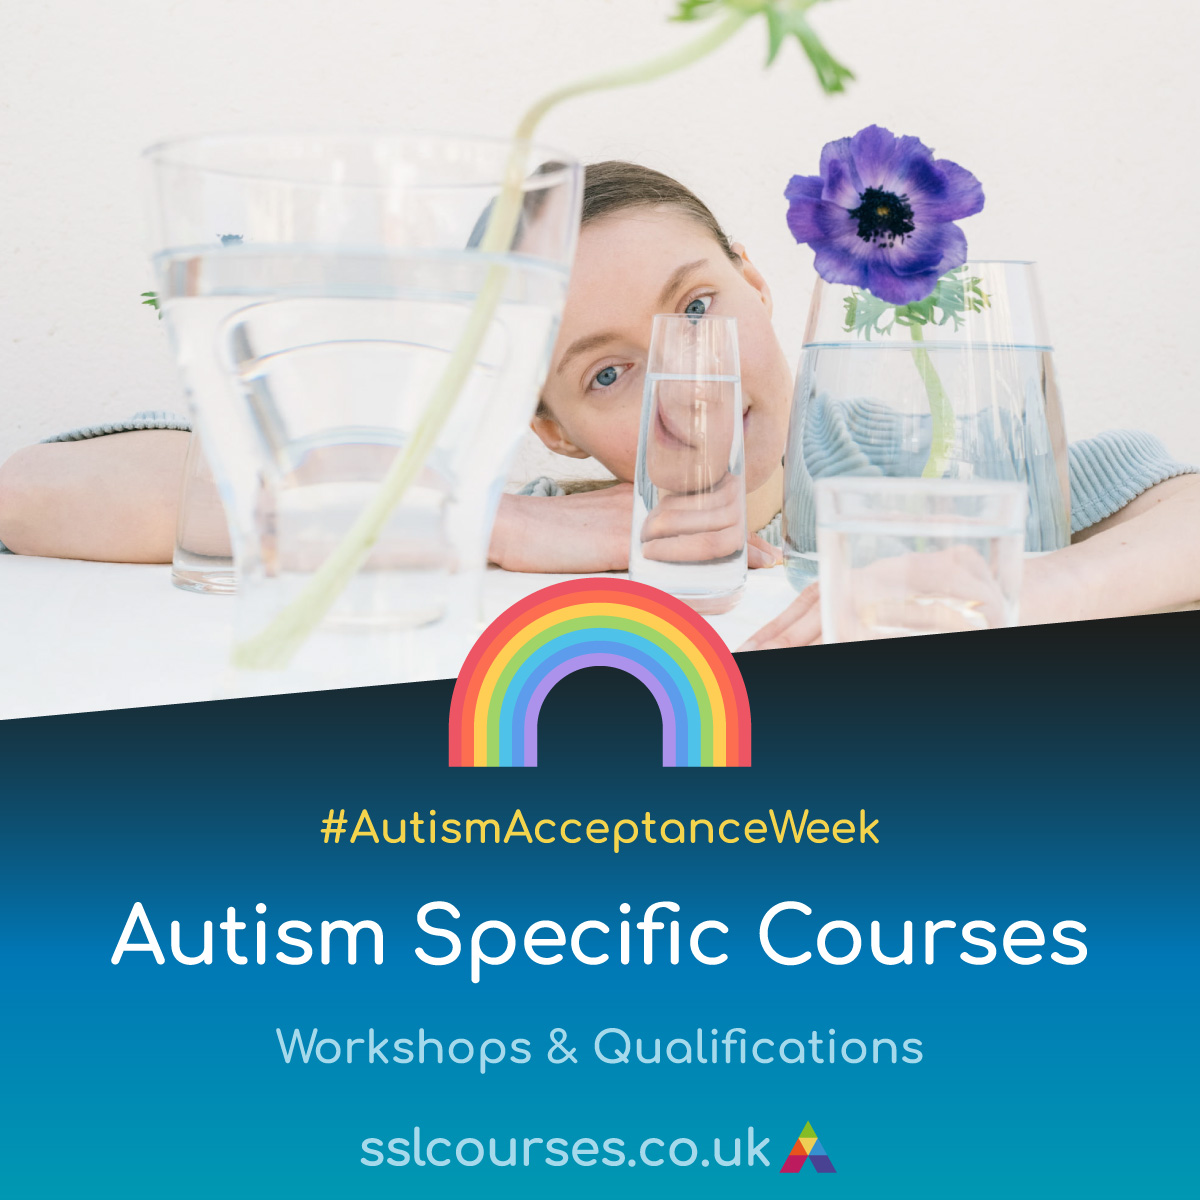 🌈 Happy #AutismAcceptanceWeek! 🌈 Celebrate by enrolling in our #Autism specific courses here at SS&L. We hope you'll learn how to better support people in your life who are autistic - whether that’s yourself or someone you care for.💛 Find out more: shorturl.at/amrB3